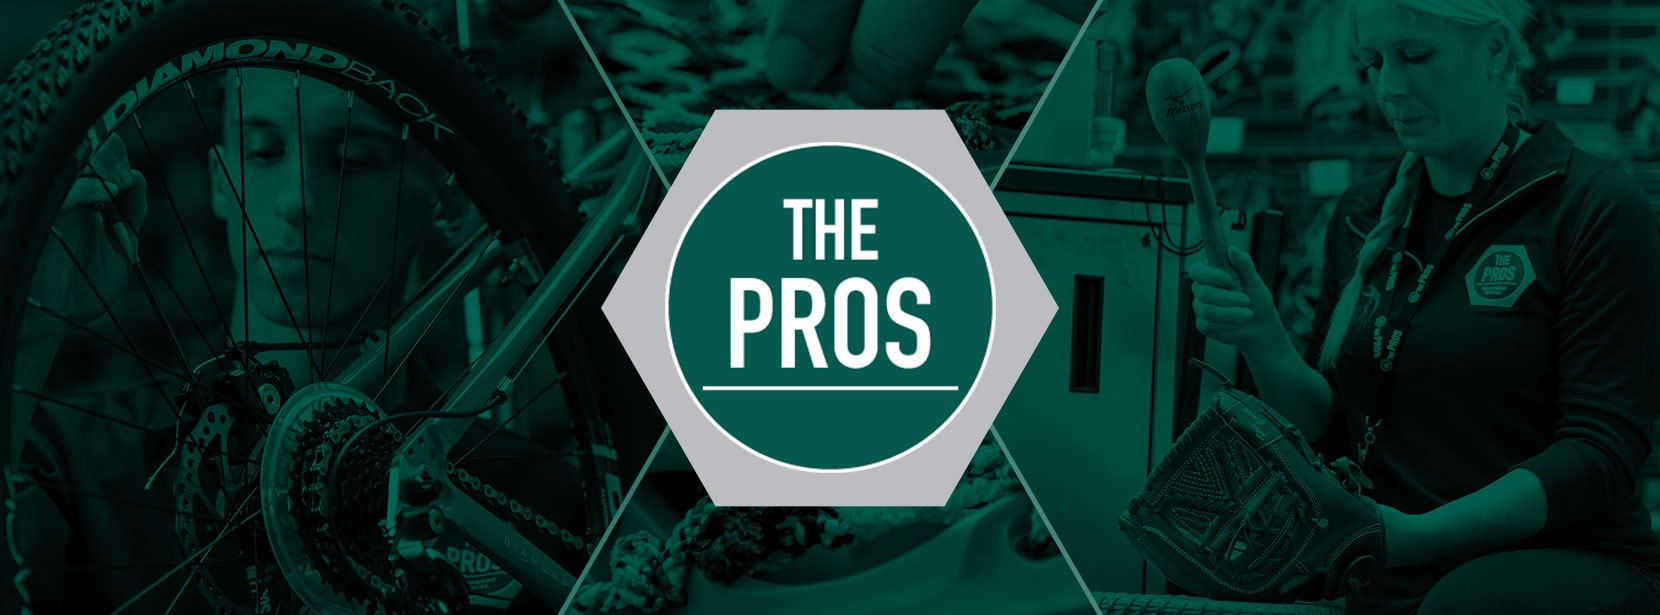 The Pros Equipment Services